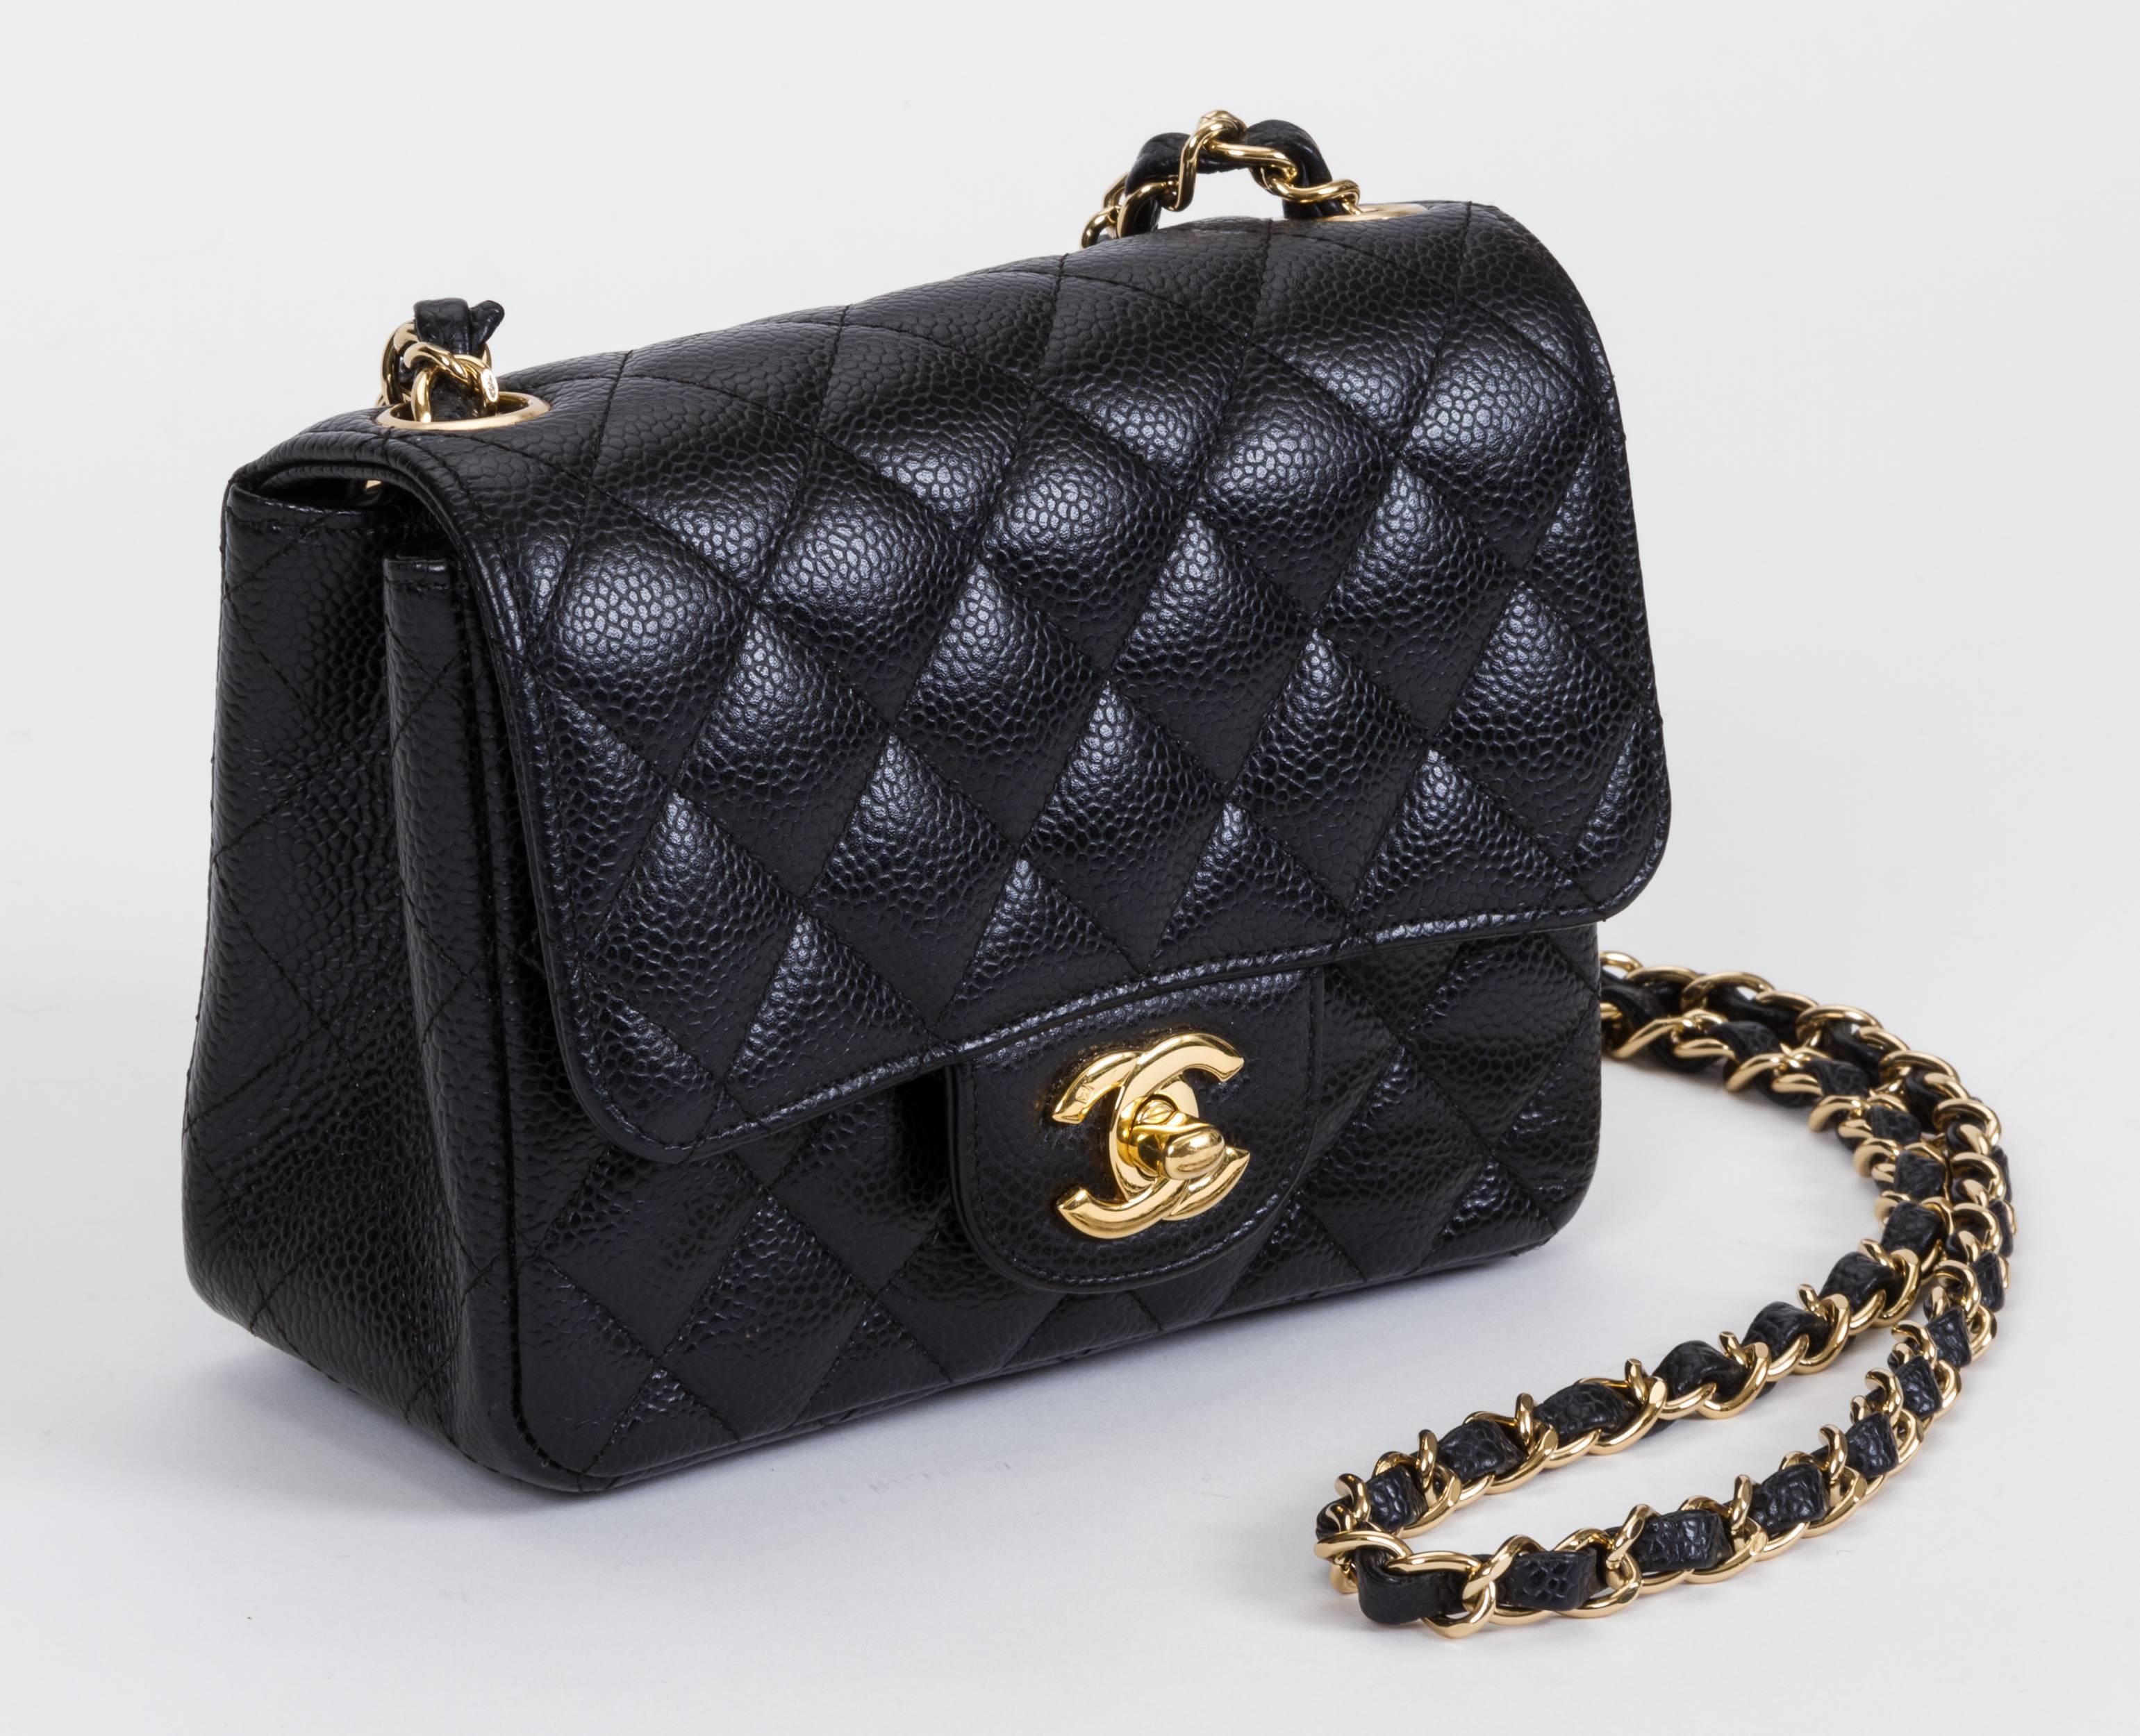 Chanel black caviar quilted cross body mini flap bag. One exterior back pocket and one interior zipped compartment. Gold tone hardware. Shoulder drop 21